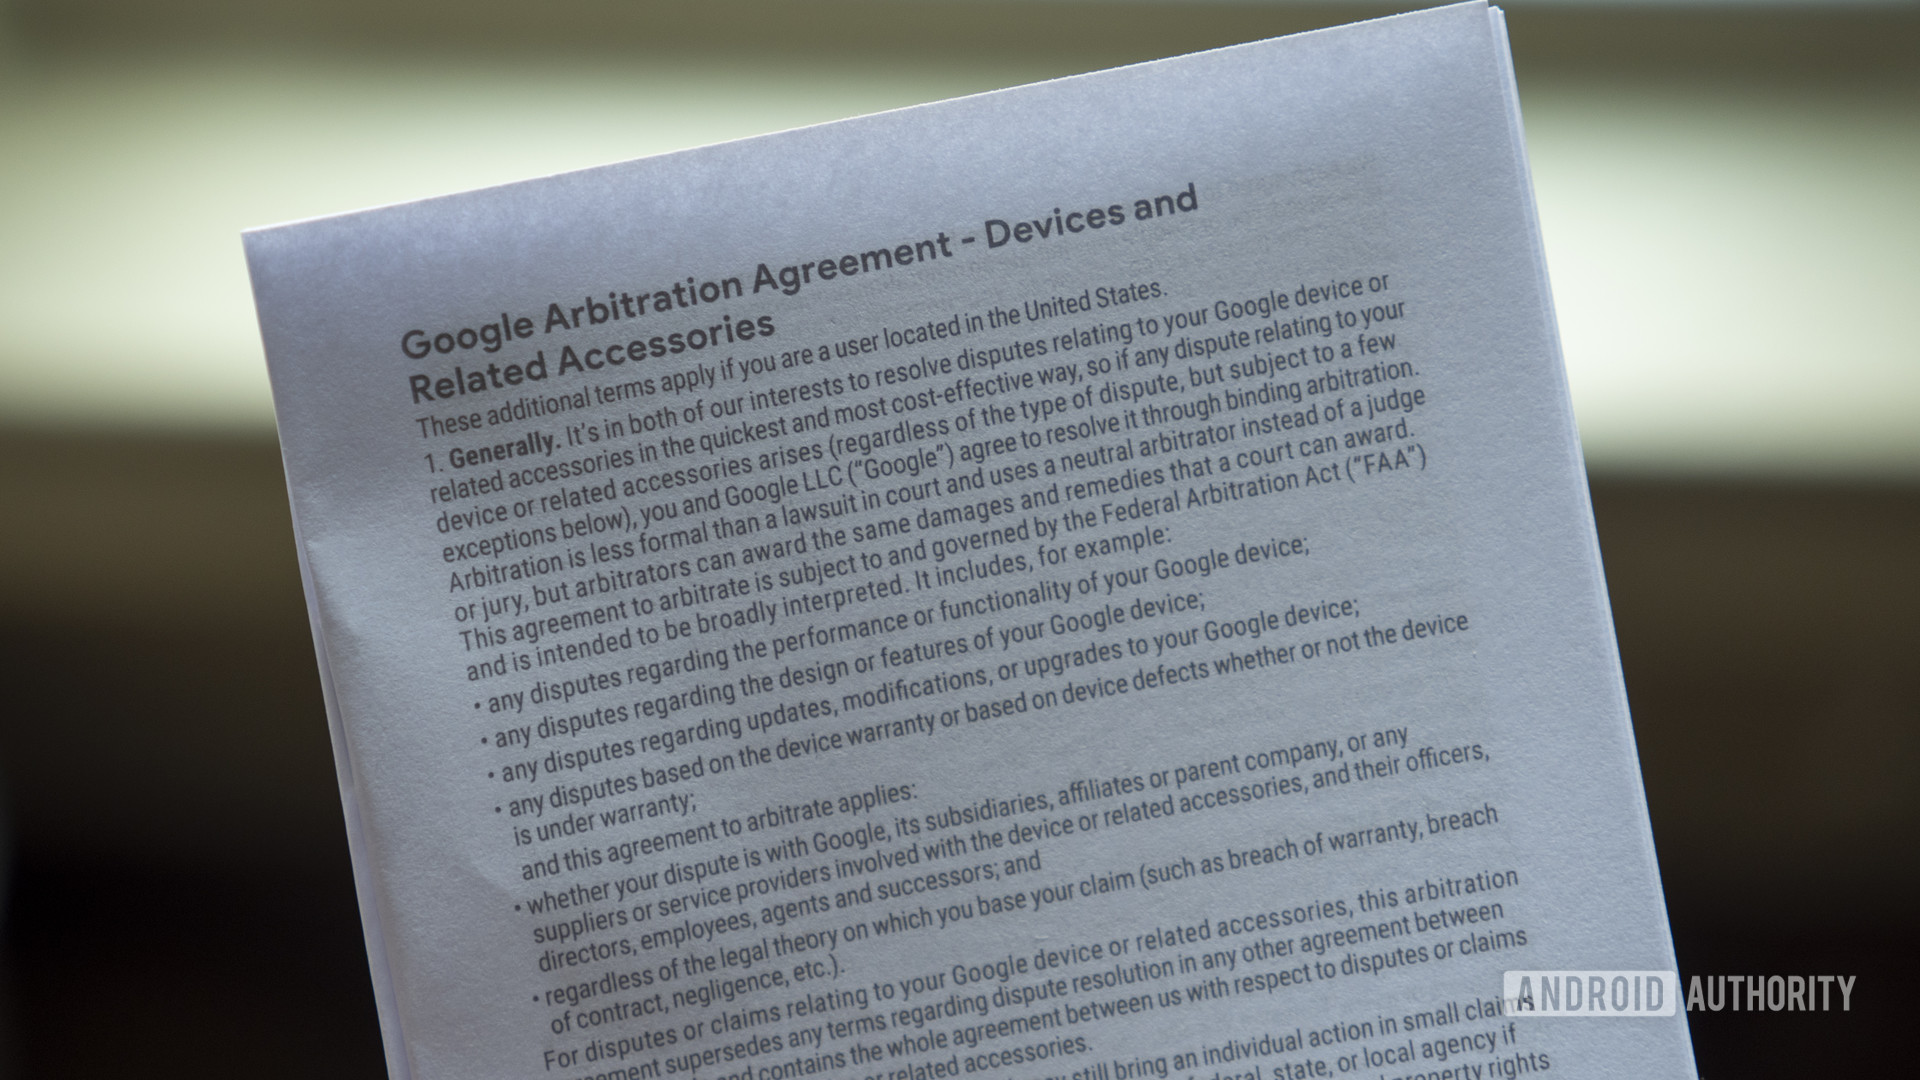 google arbitration agreement devices and related accessories pixel 4 paper 1